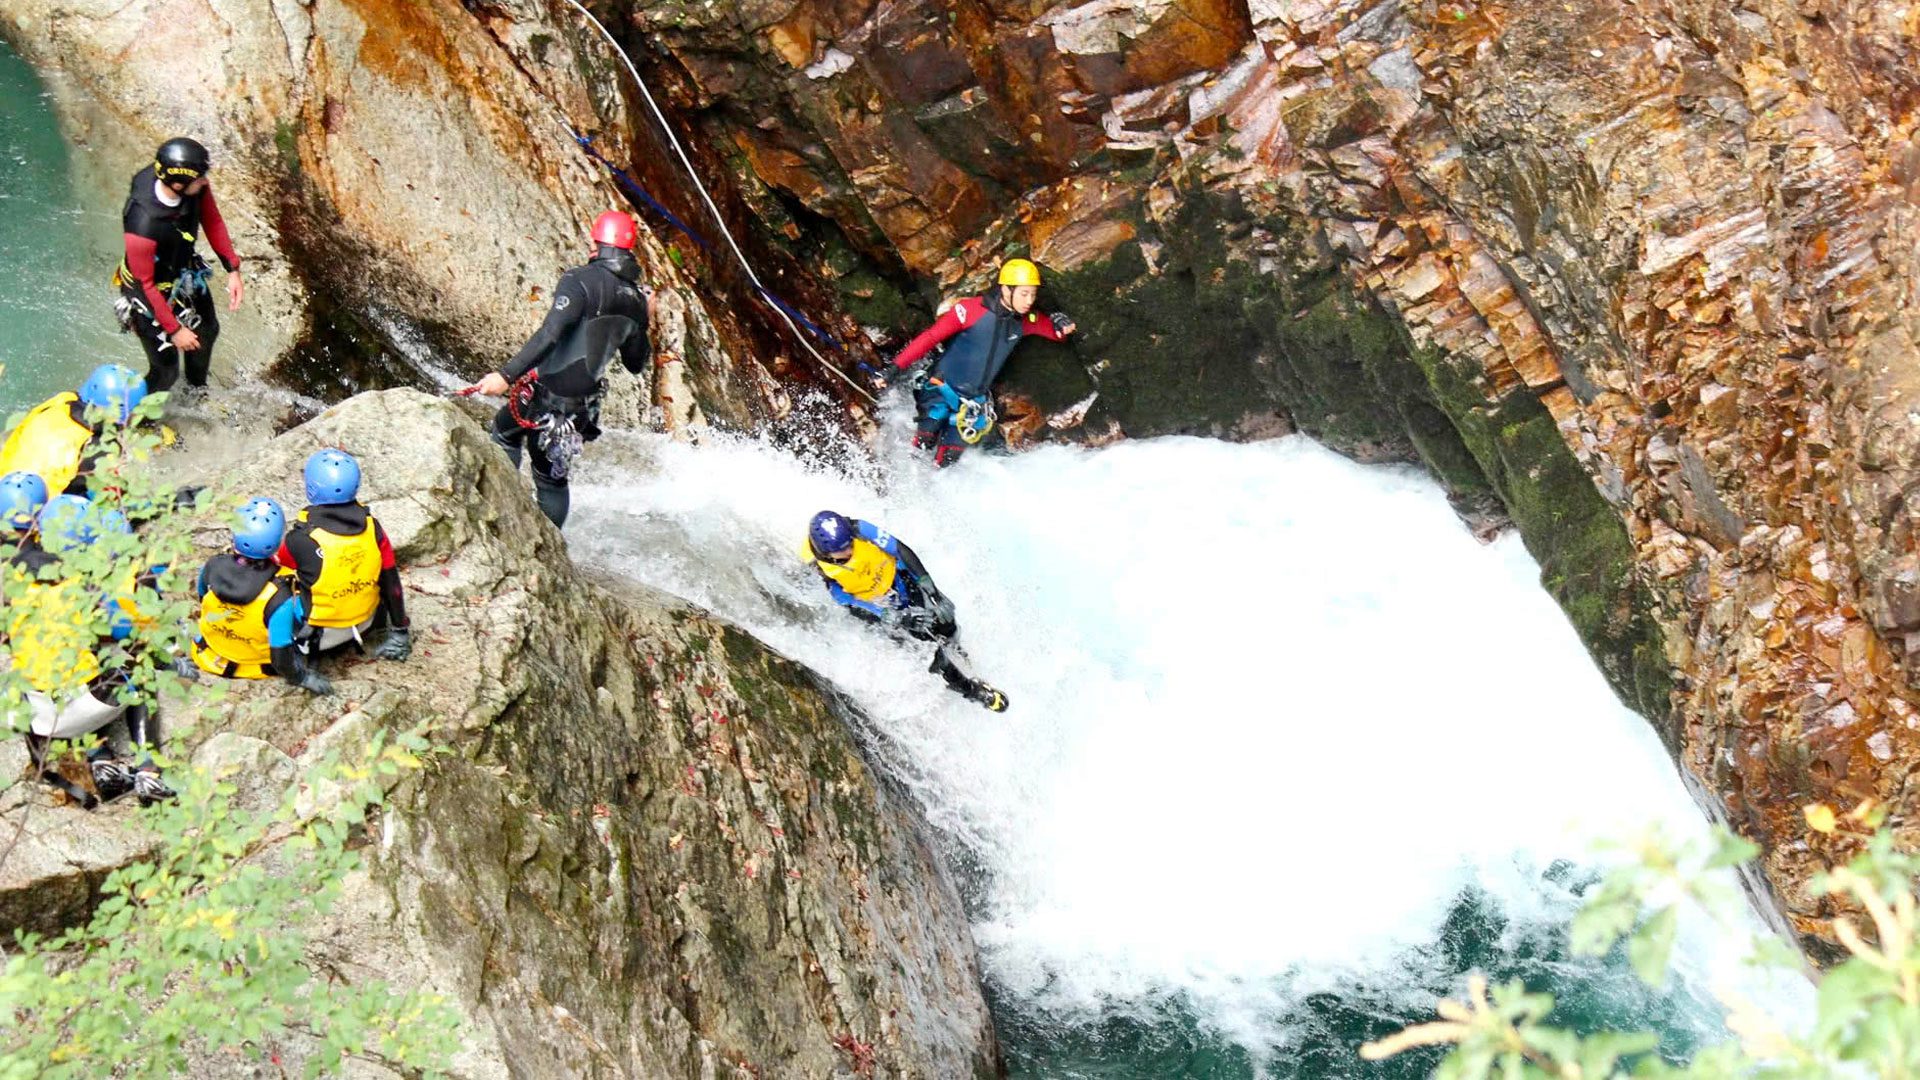 Canyoning course in Minakami Japan